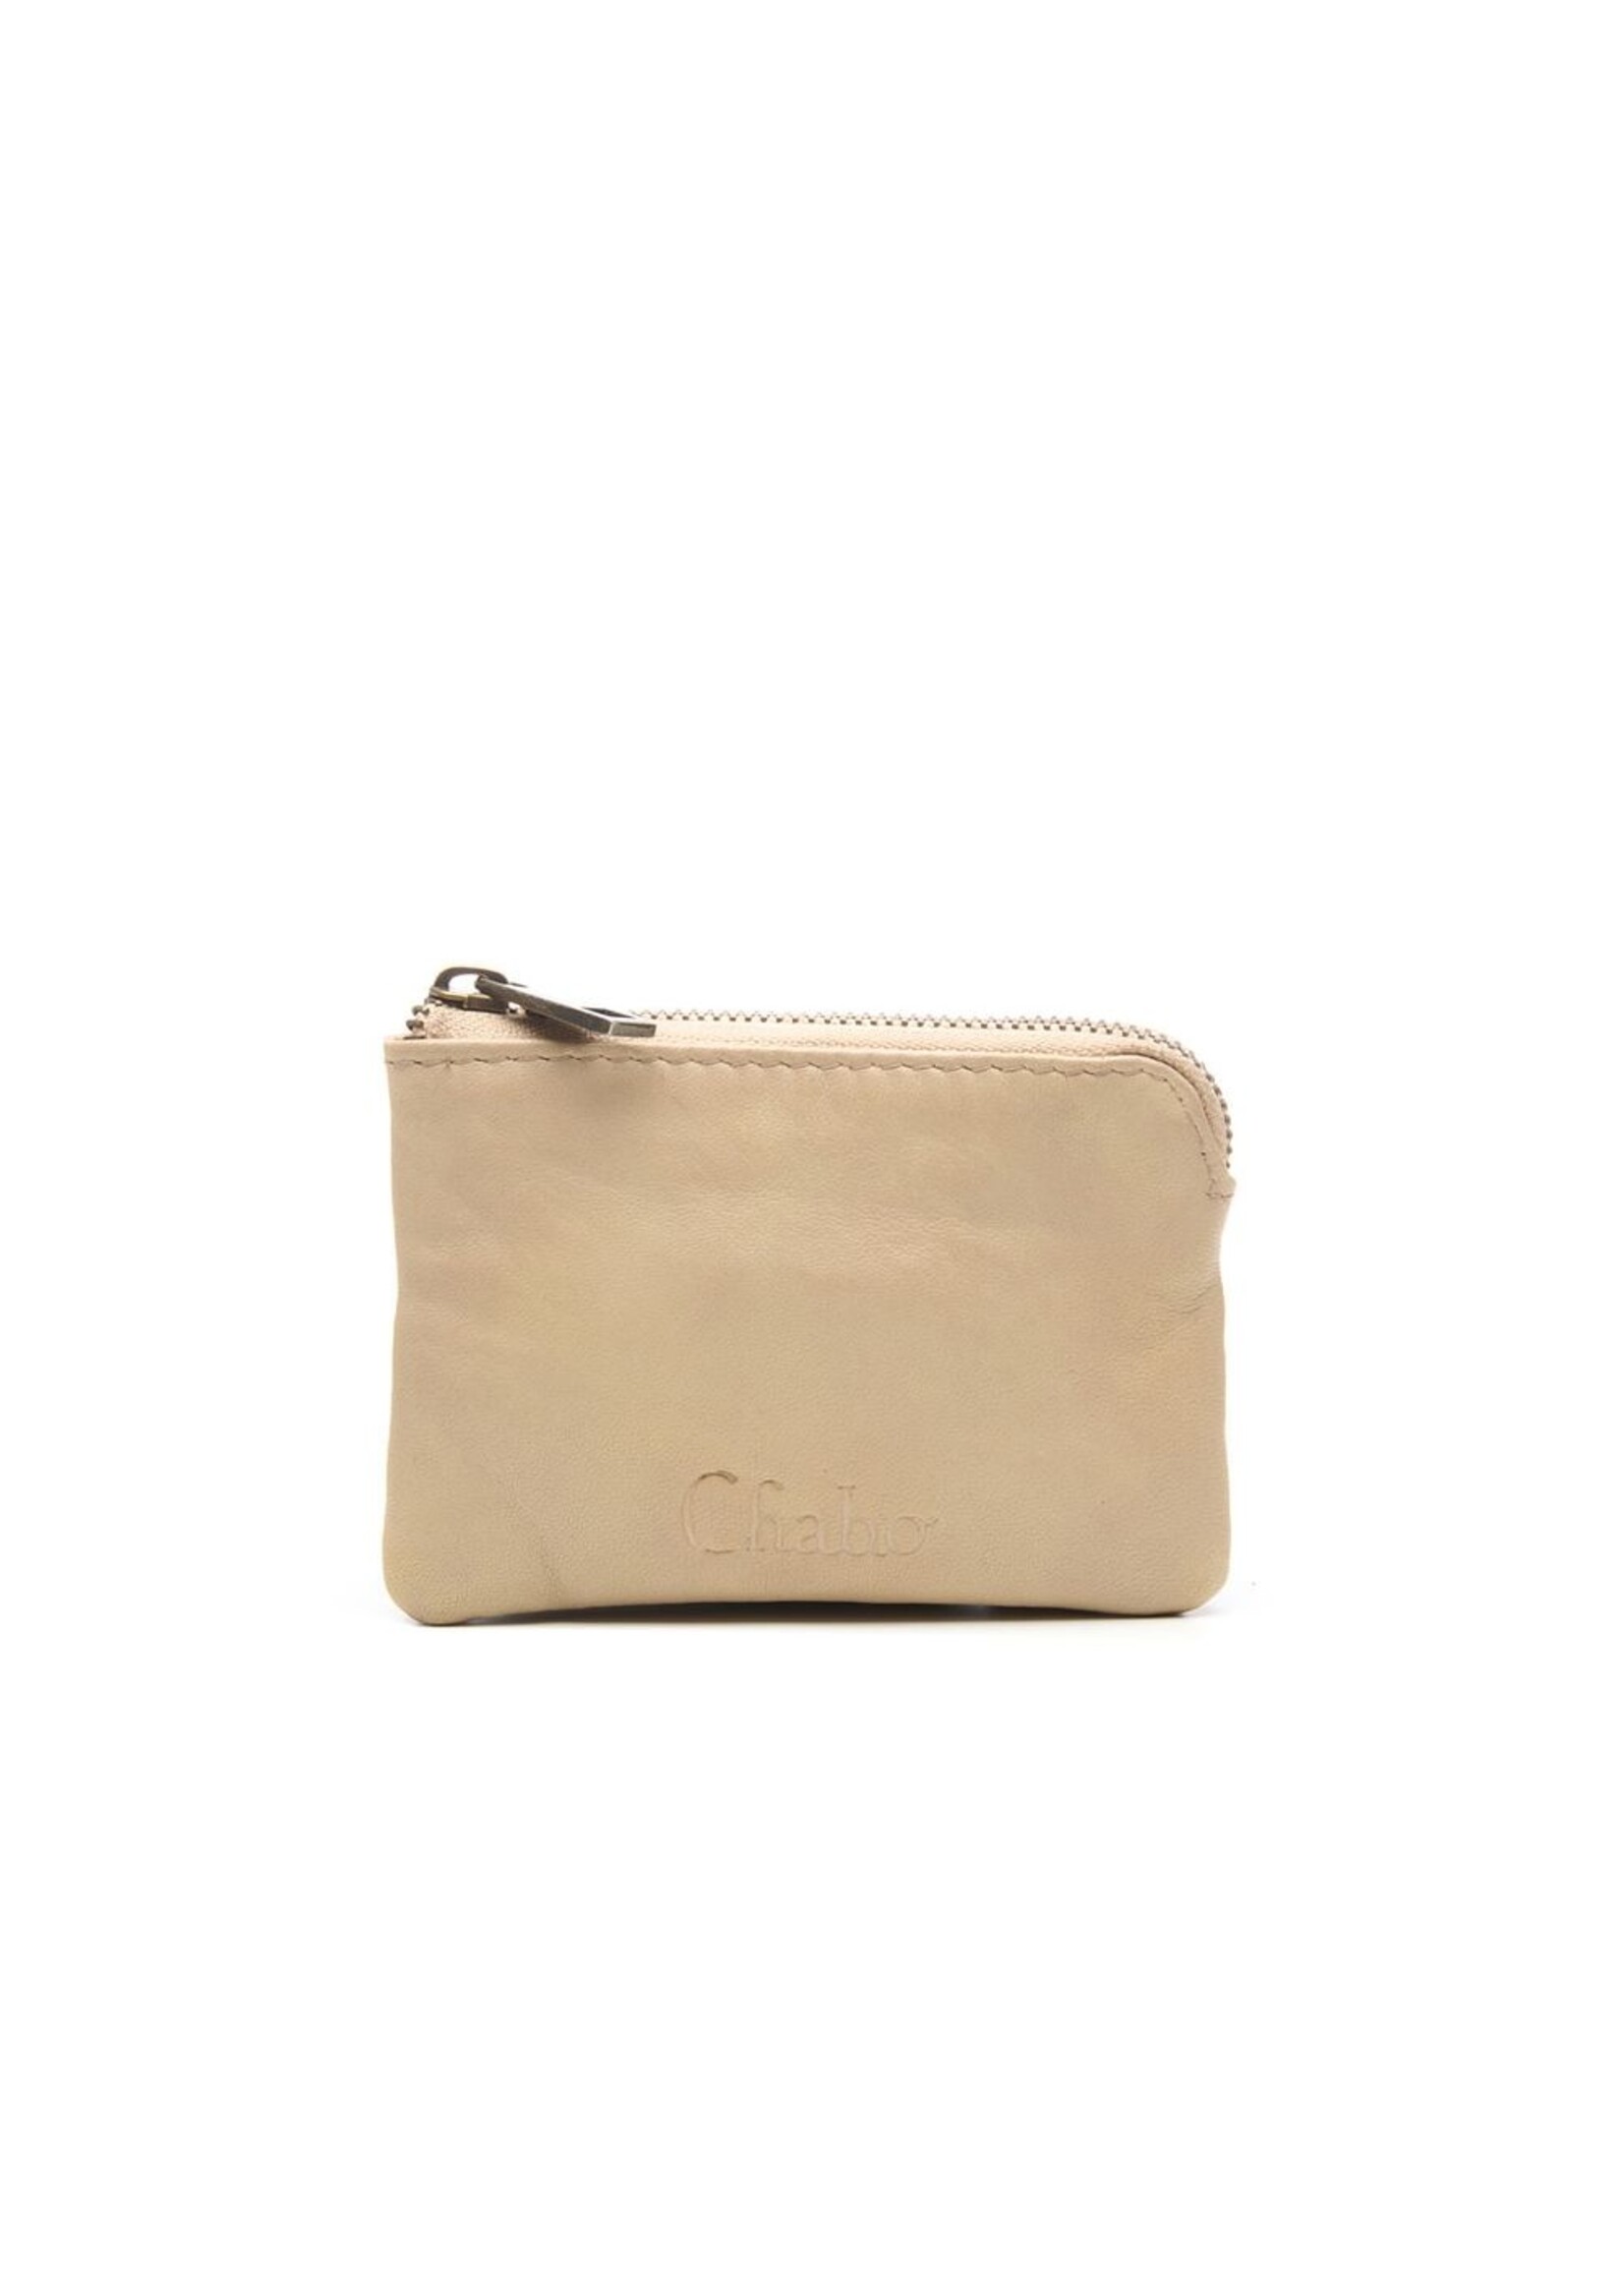 Chabo Bags Diva Wallet